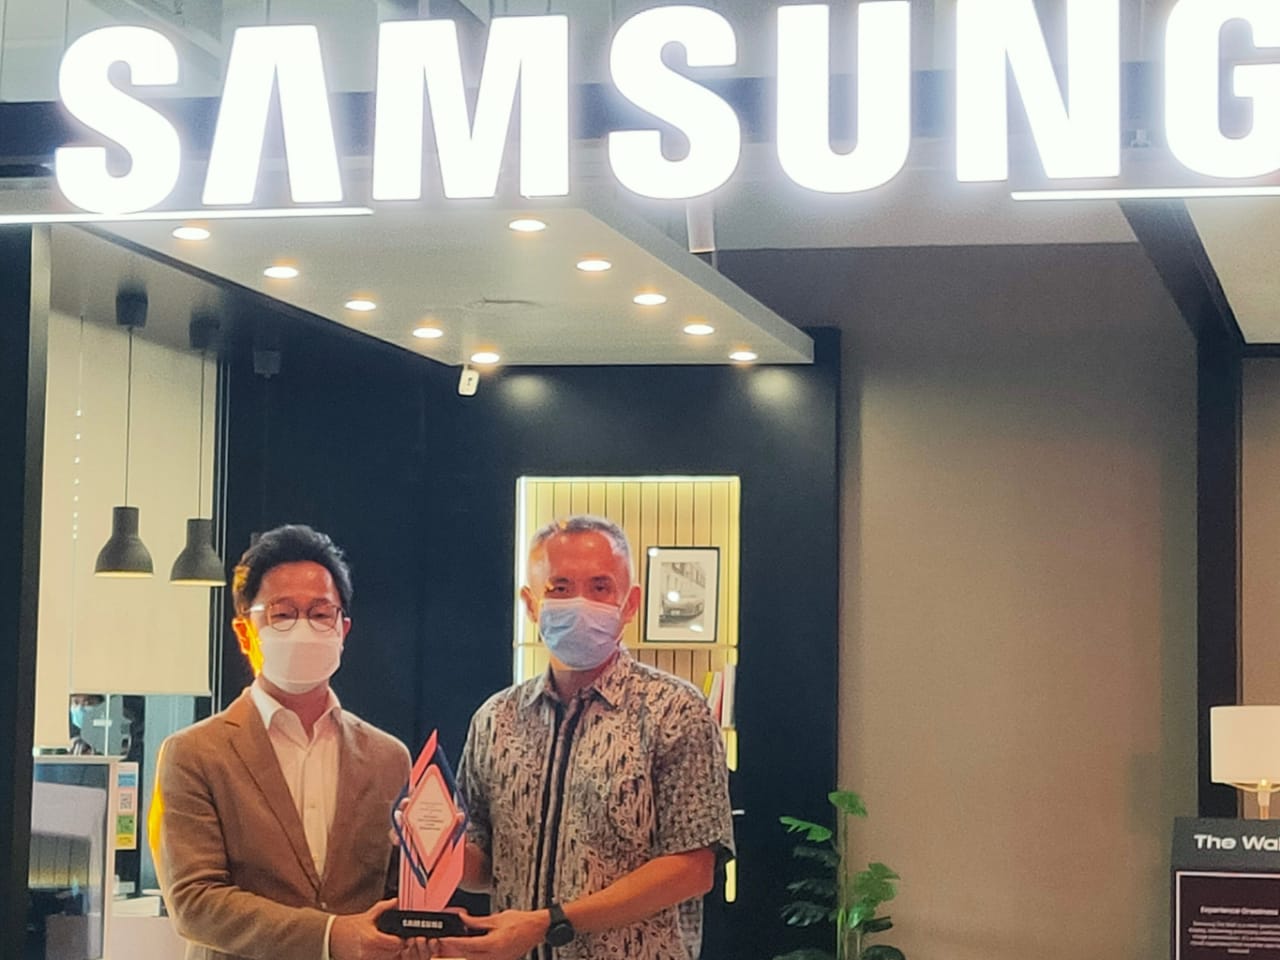  The image shows the grand opening of the Samsung Experience Lounge in Jakarta, Indonesia, which is the first Samsung Experience Lounge in Indonesia.